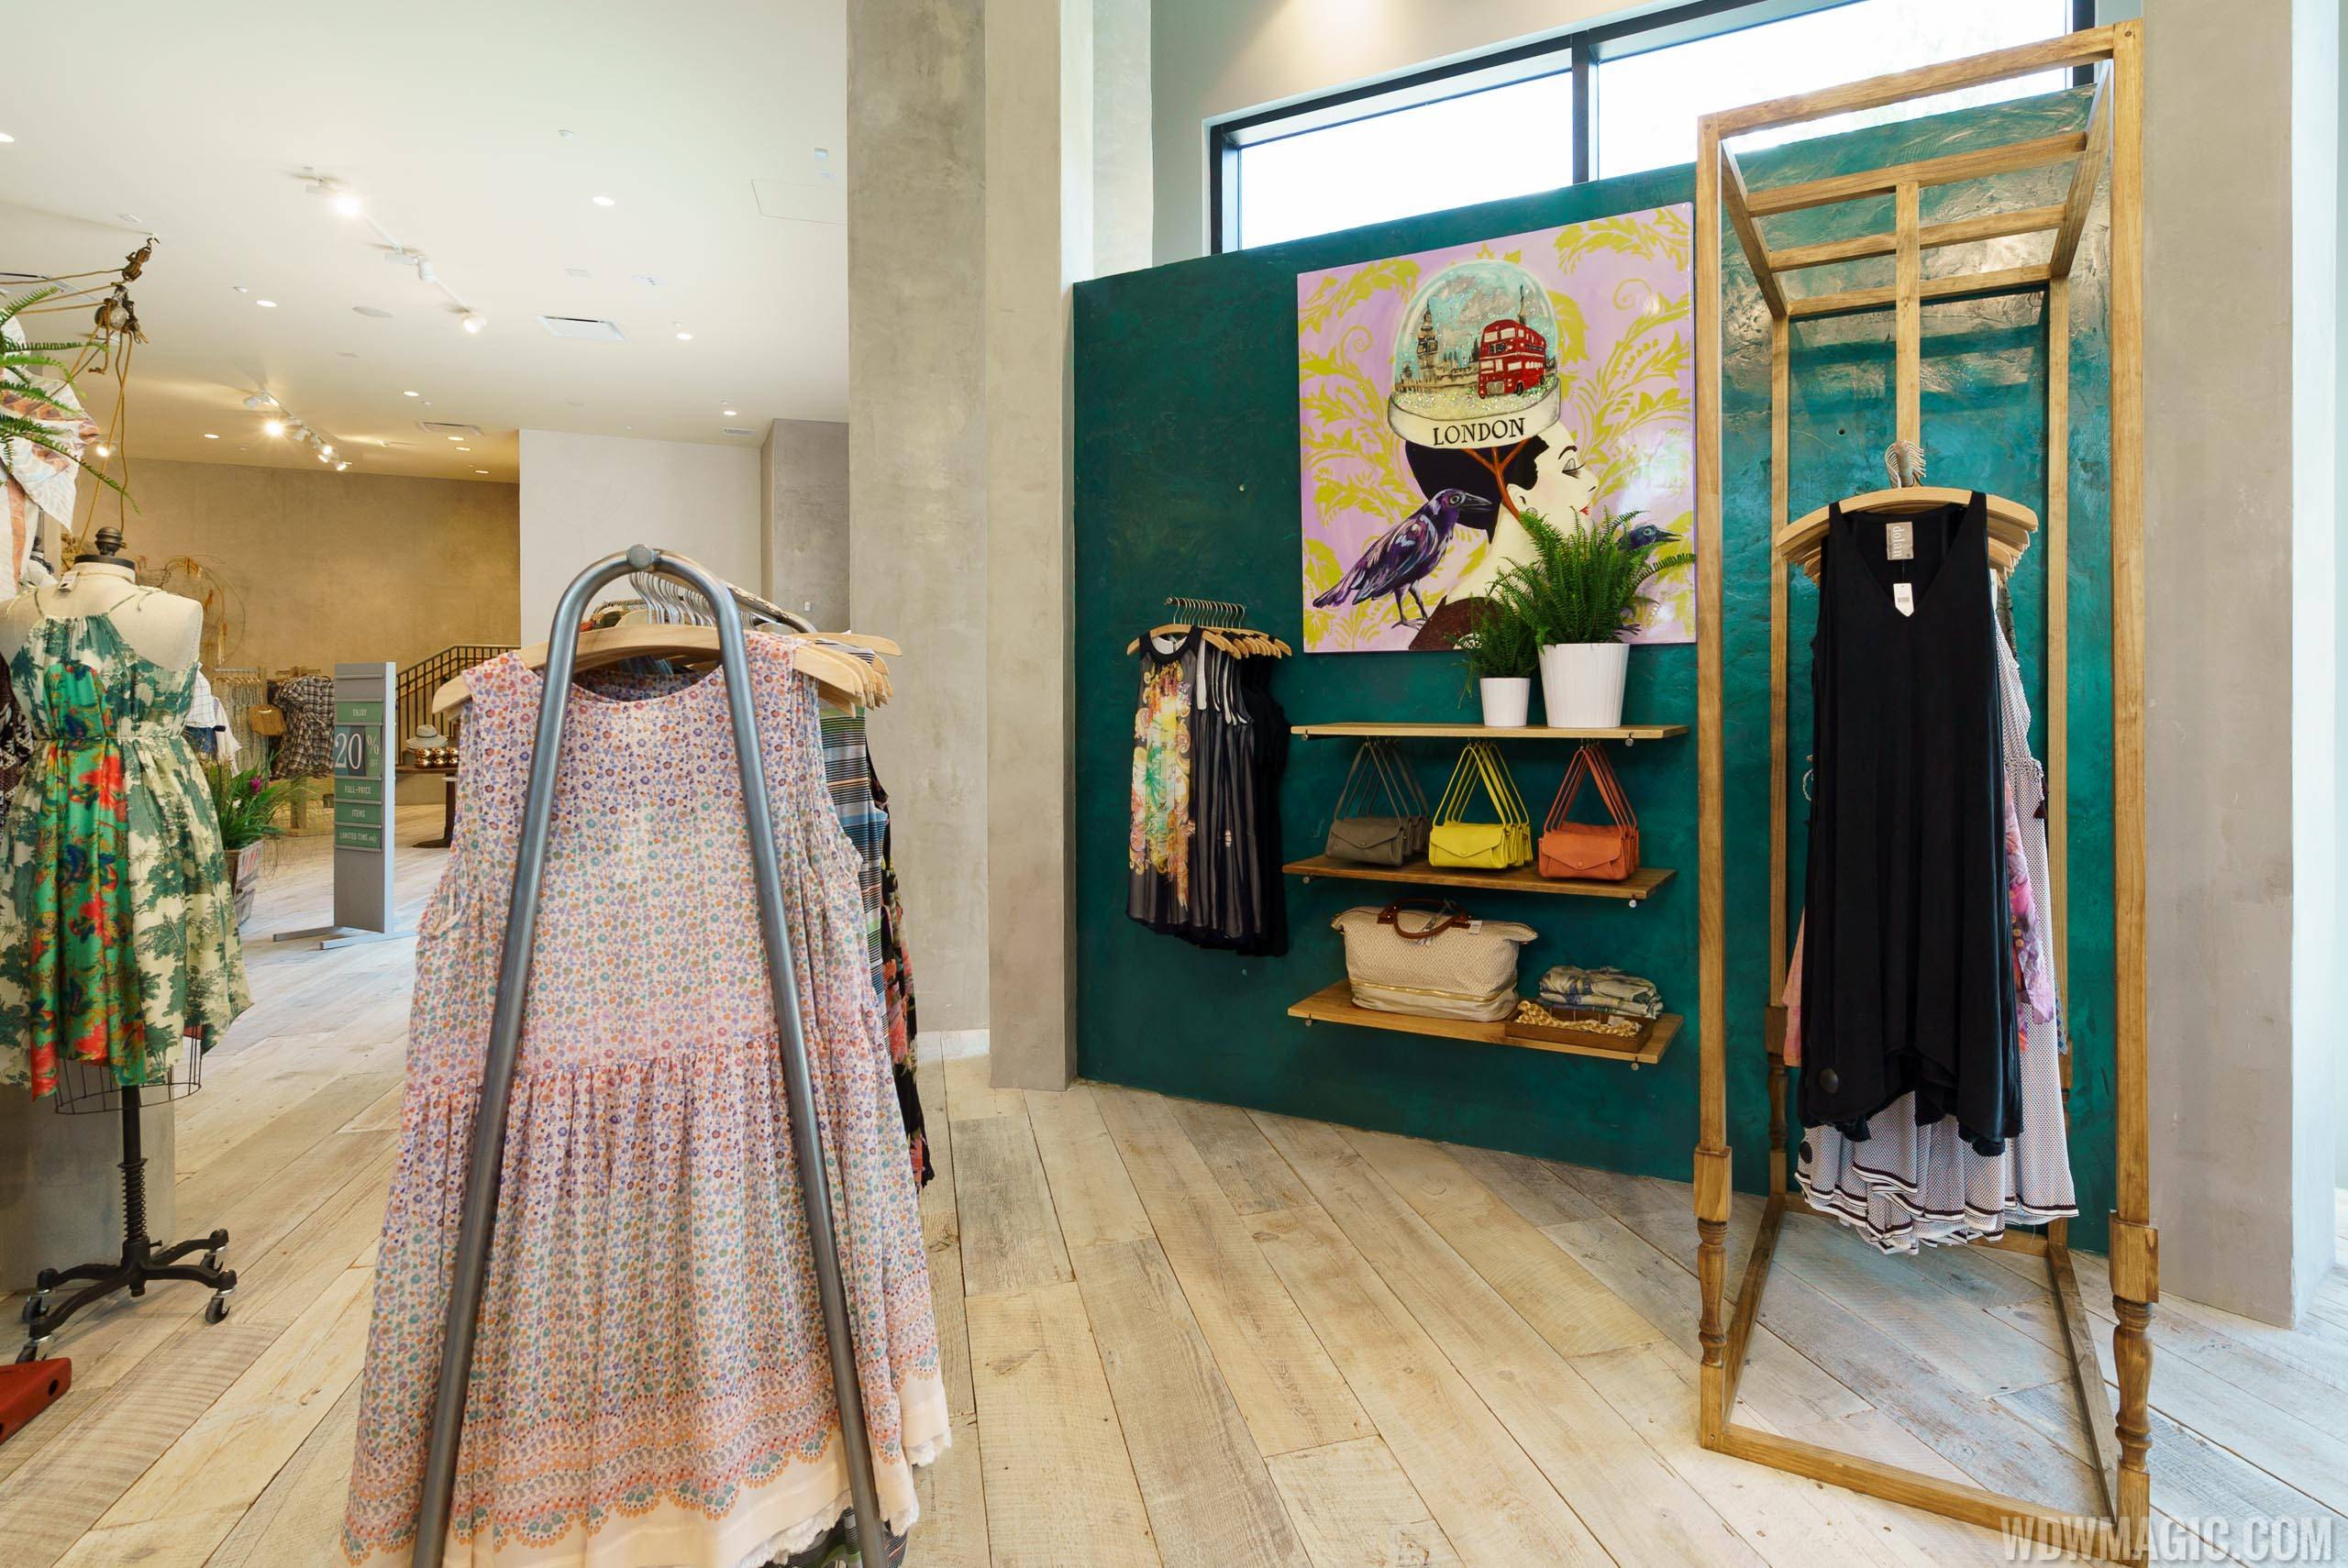 Anthropologie overview